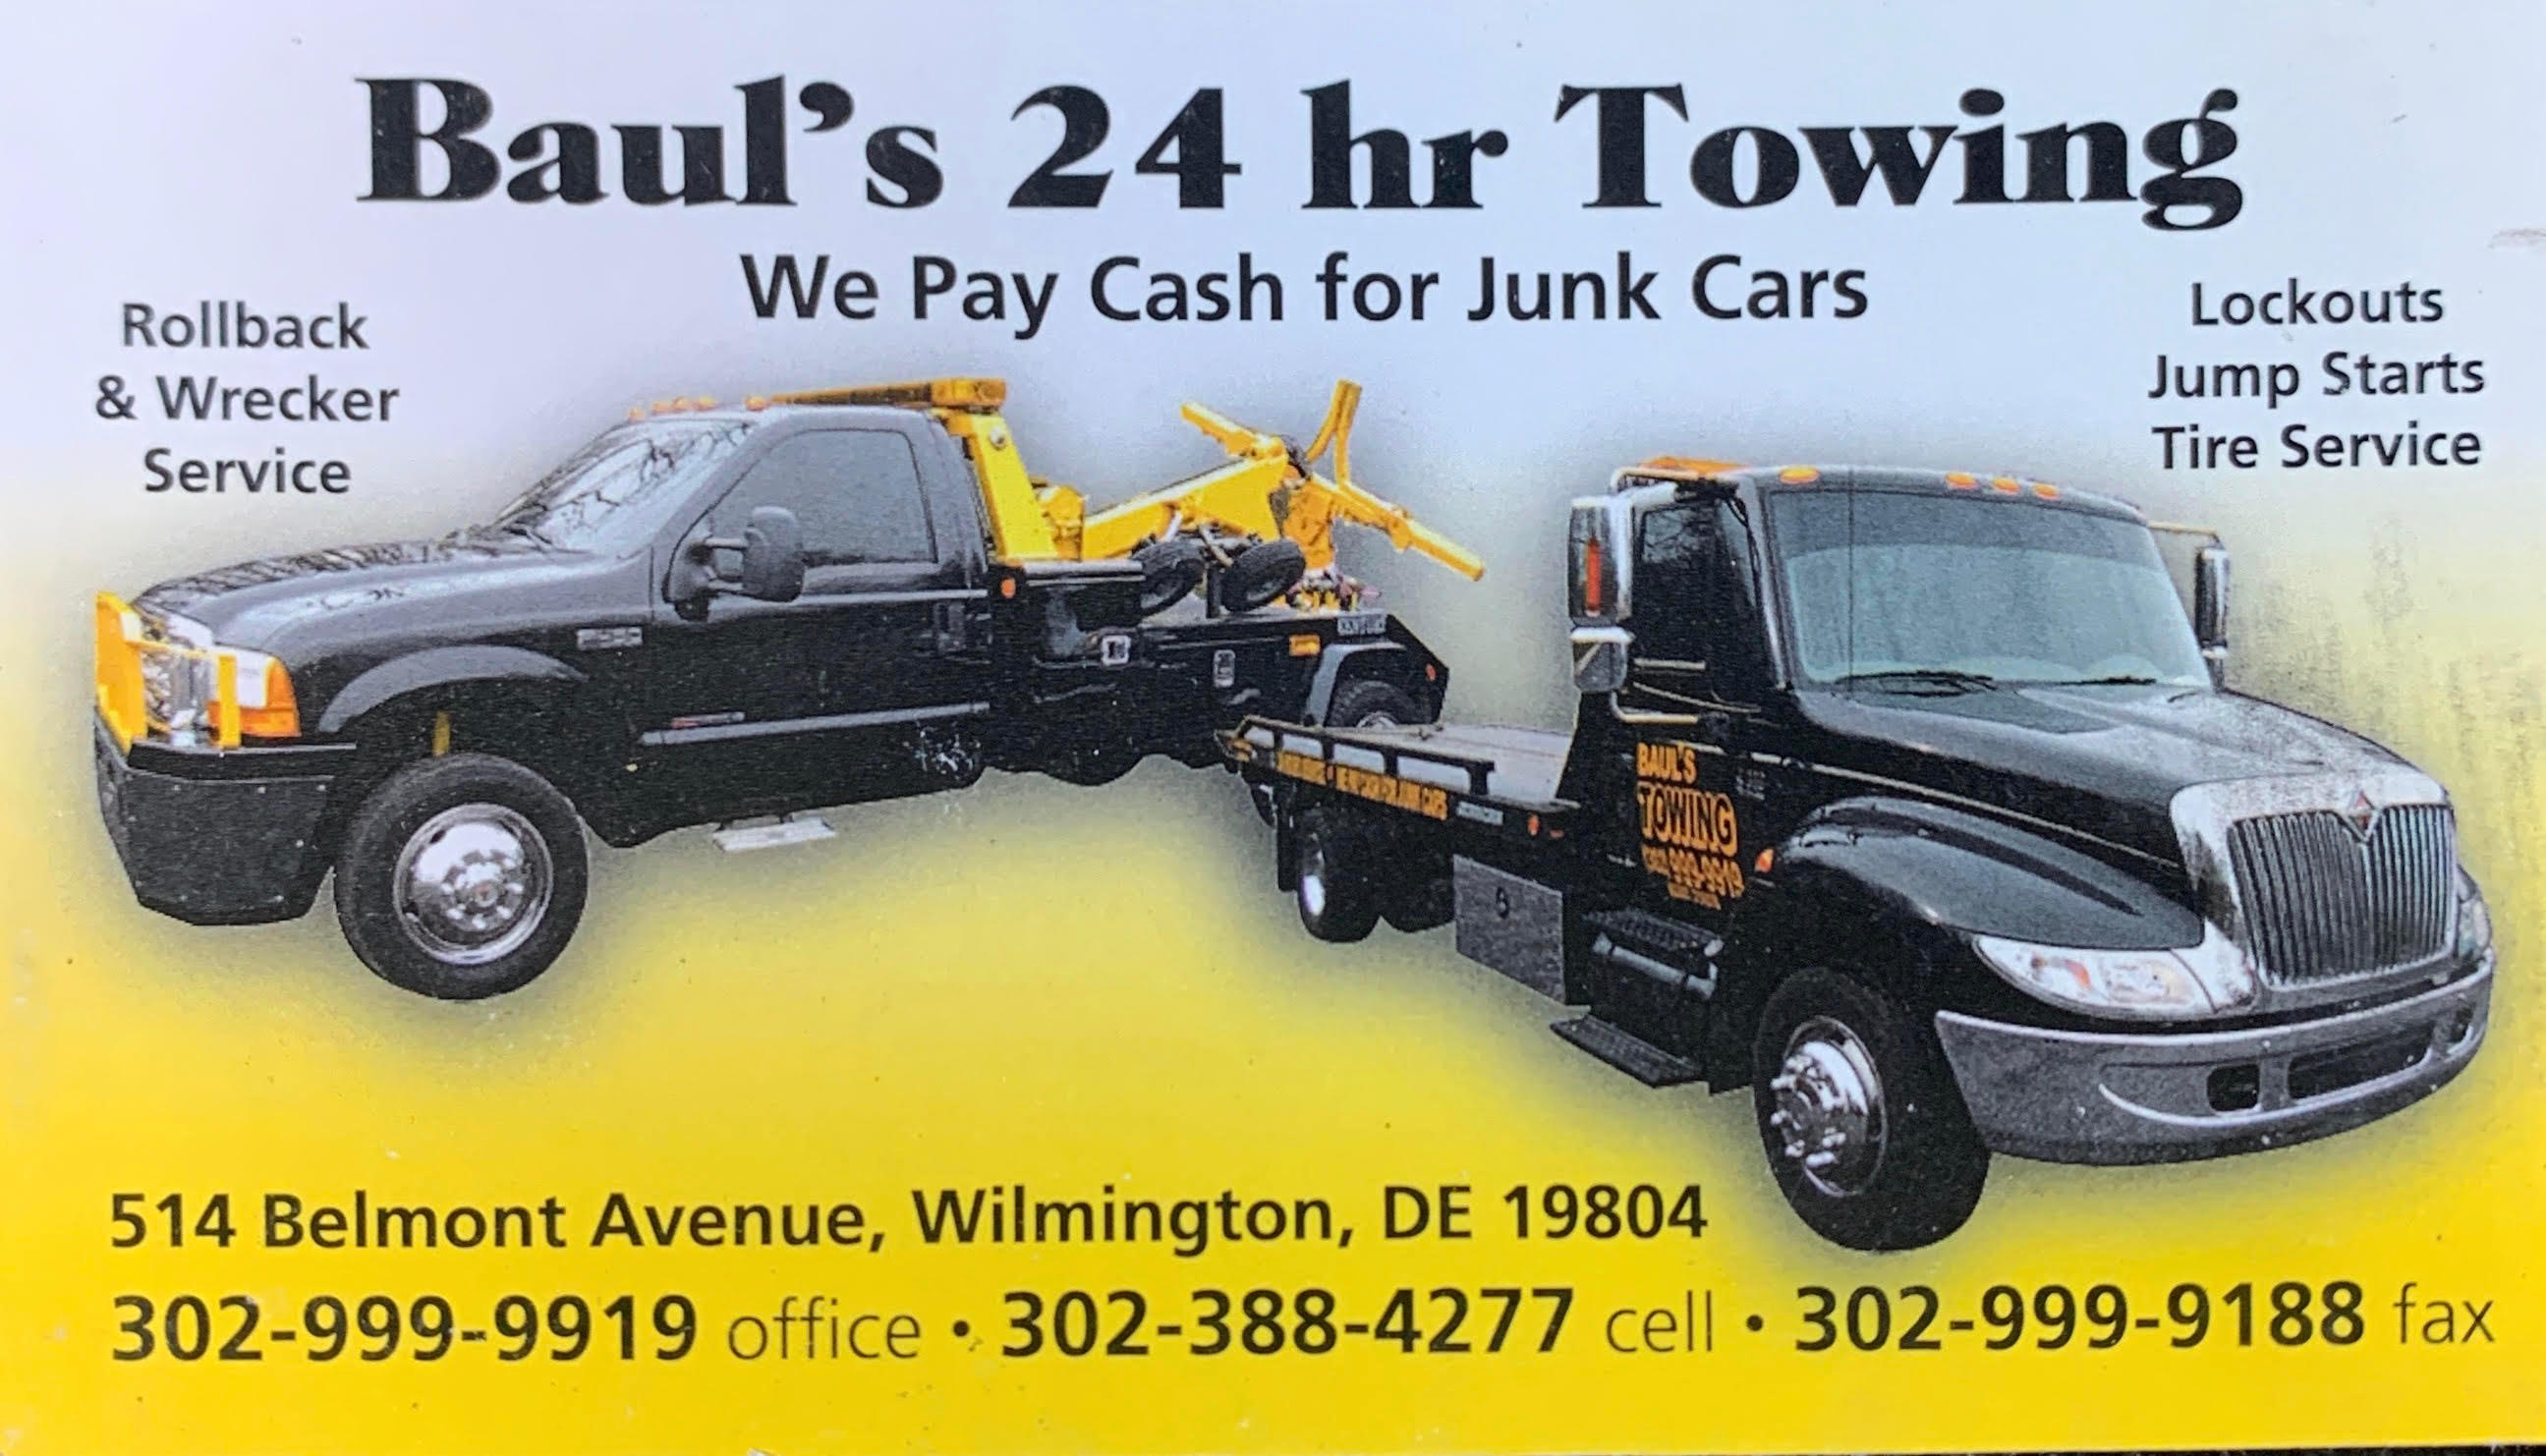 Baul's 24hr Towing & Services Photo